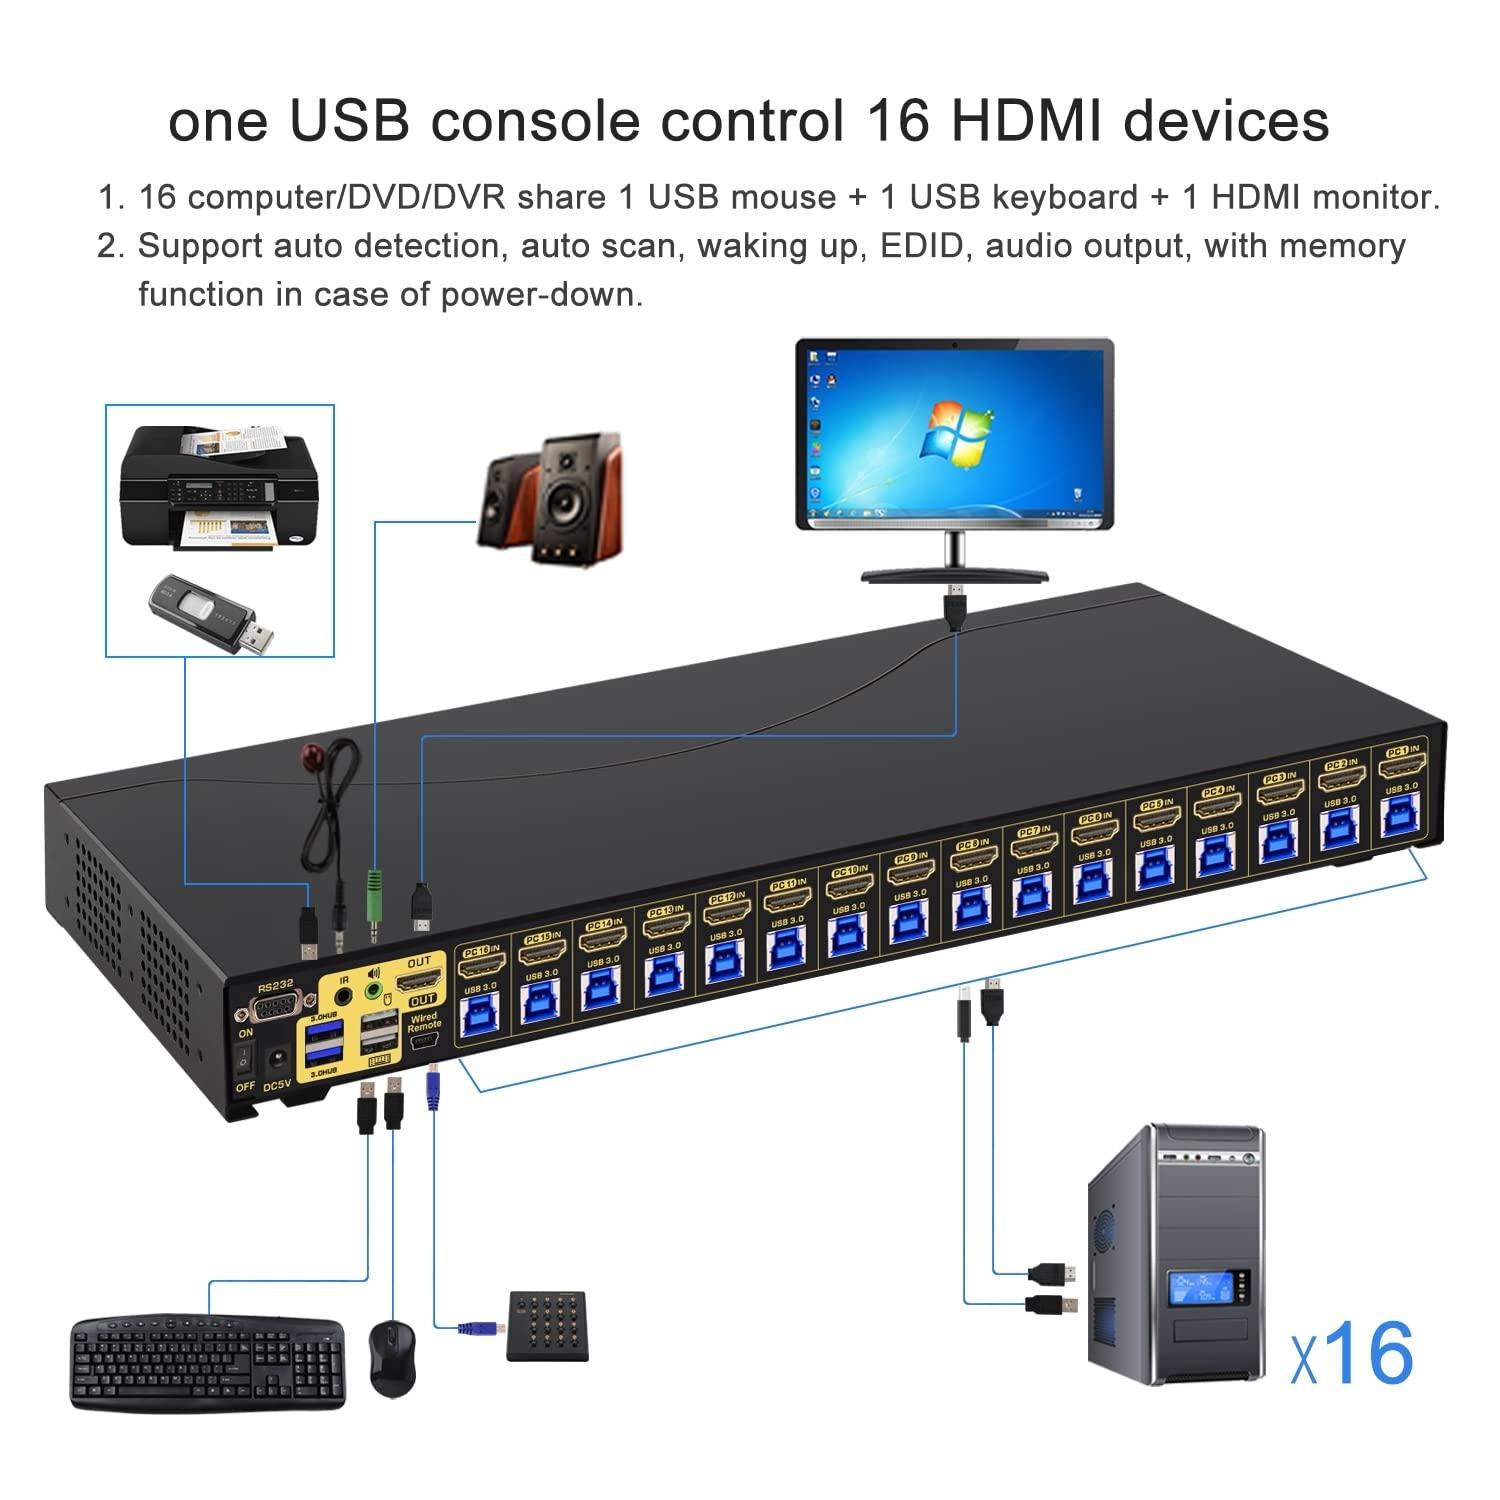 CKL 16 Port Rack Mount USB 3.0 KVM Switch HDMI 4K@60Hz with Audio, Cables and 2 Extra USB 3.0 Hub for 16 Computers Sharing Single Monitor (CKL-9116H-3) - CKL KVM Switches